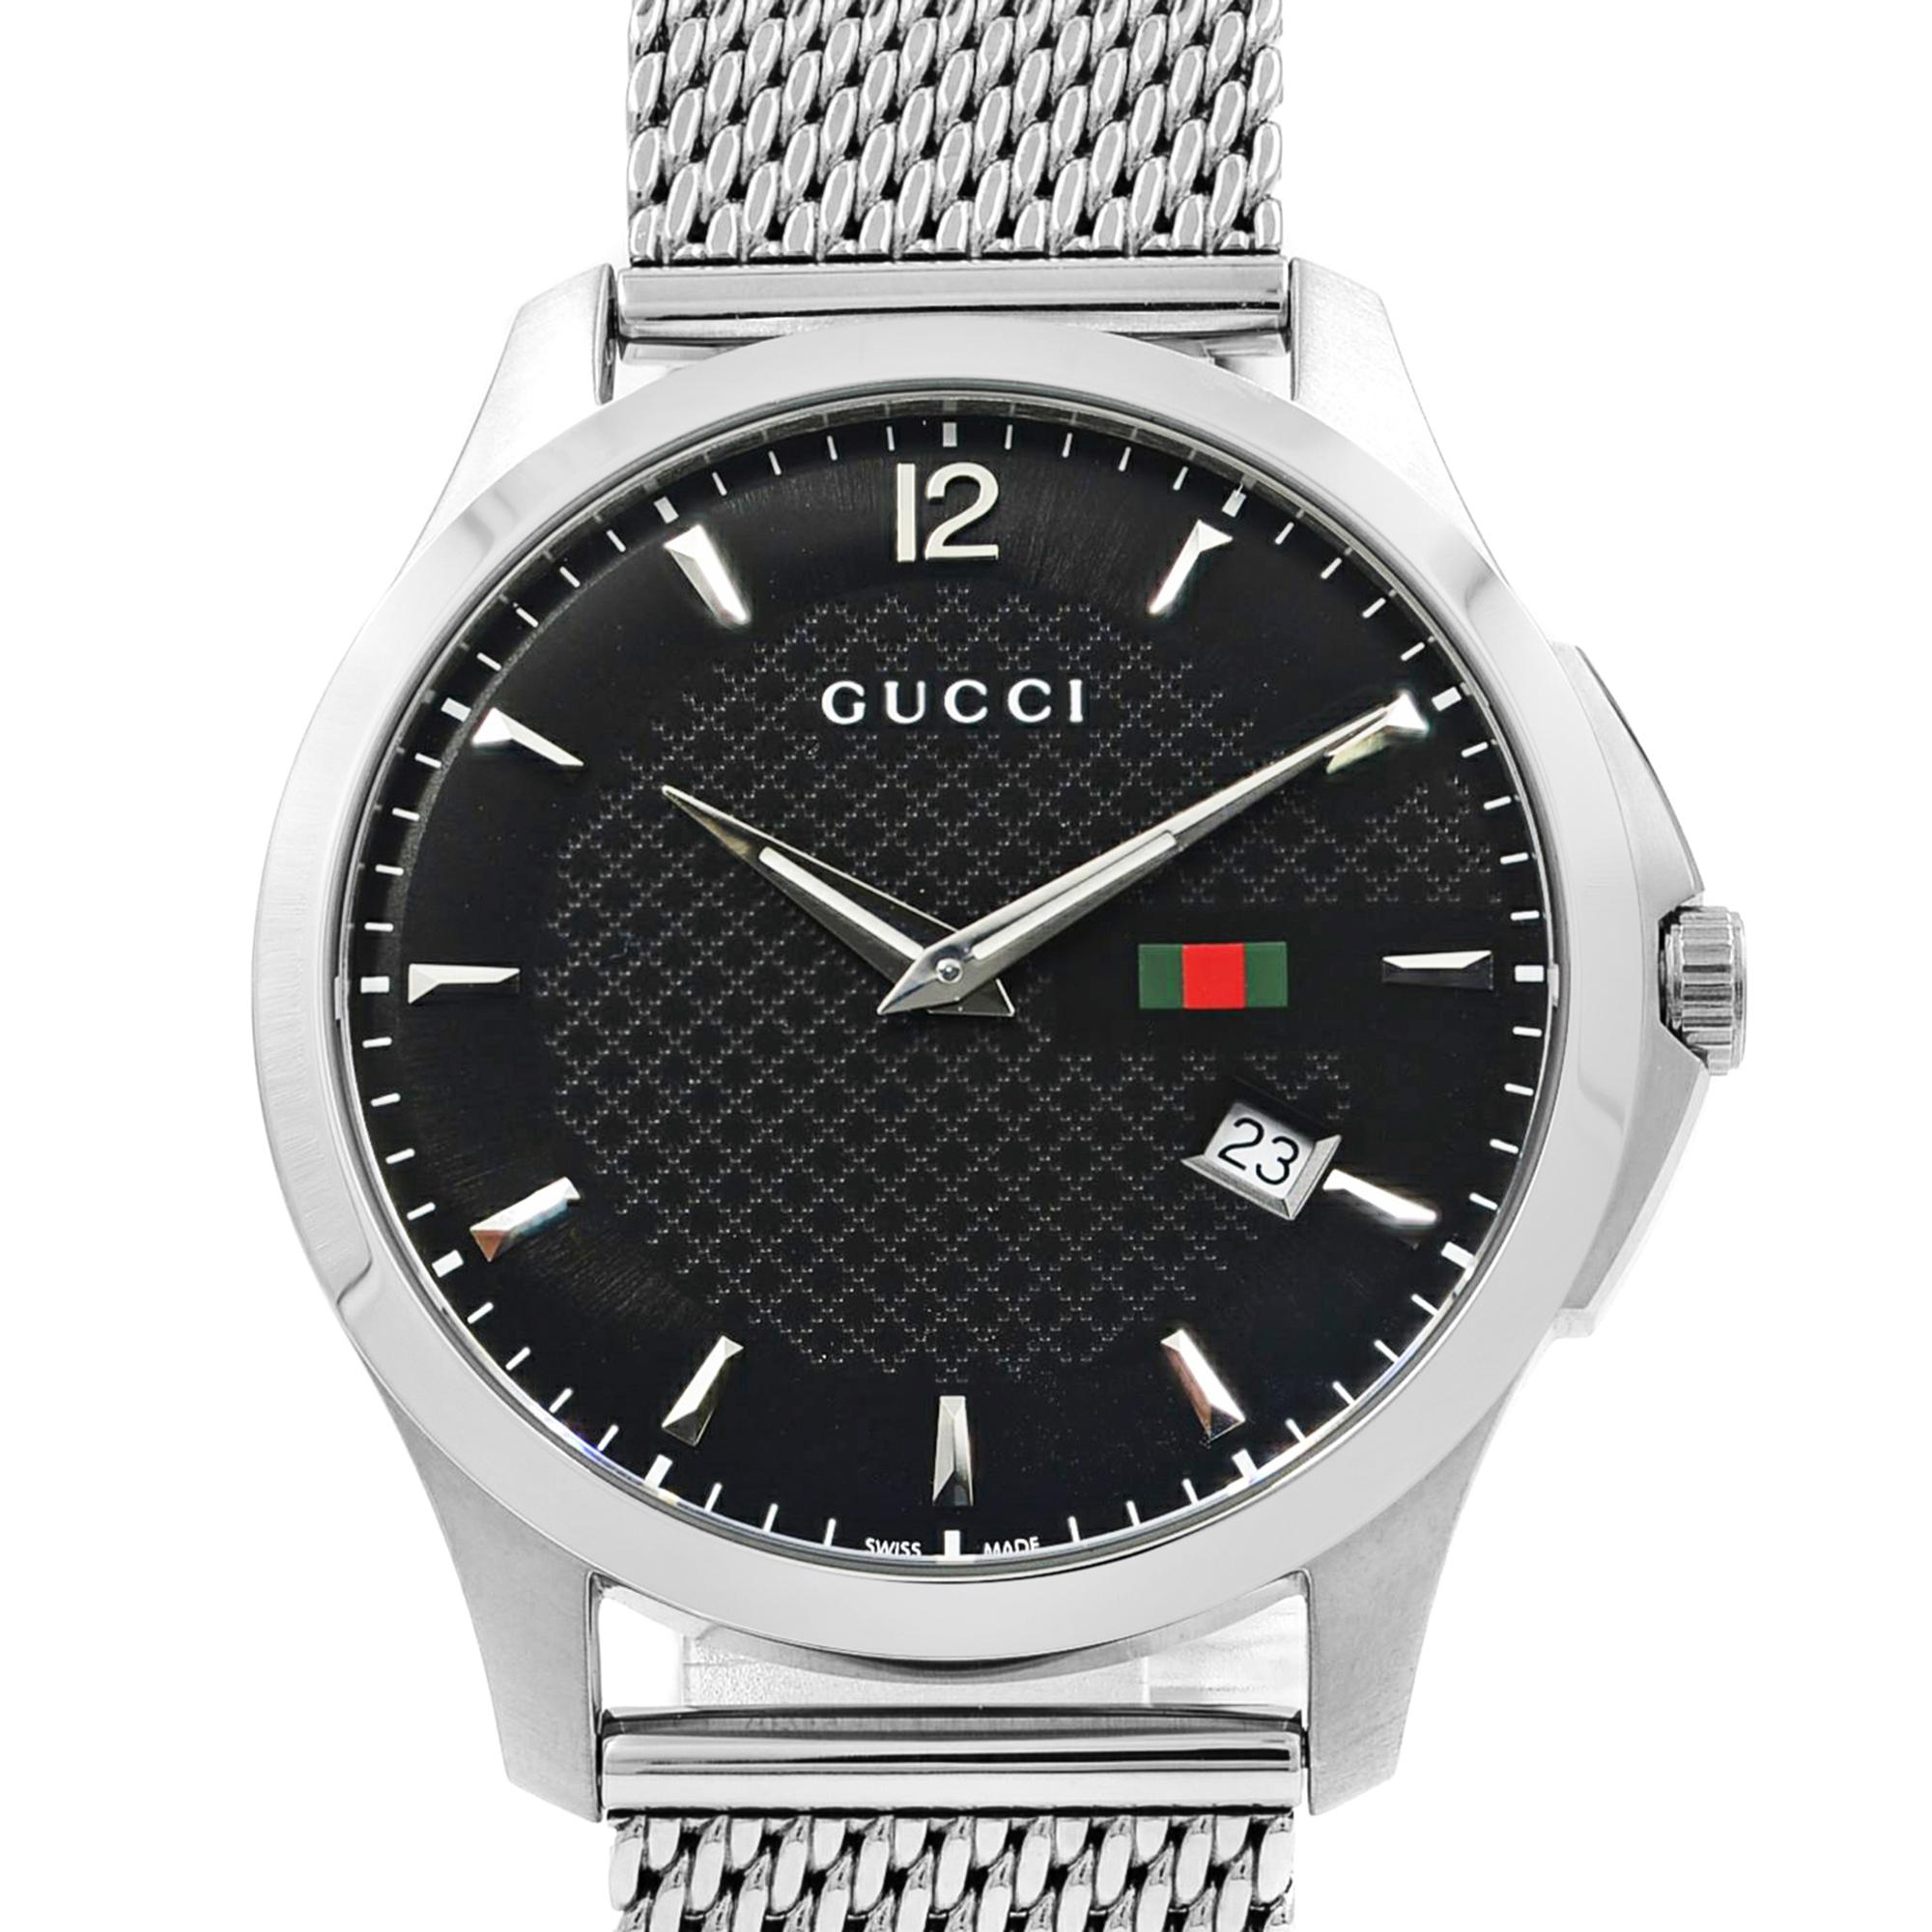 This pre-owned Gucci G-Timeless YA126308 is a beautiful men's timepiece that is powered by quartz (battery) movement which is cased in a stainless steel case. It has a round shape face, date indicator dial and has hand sticks style markers. It is